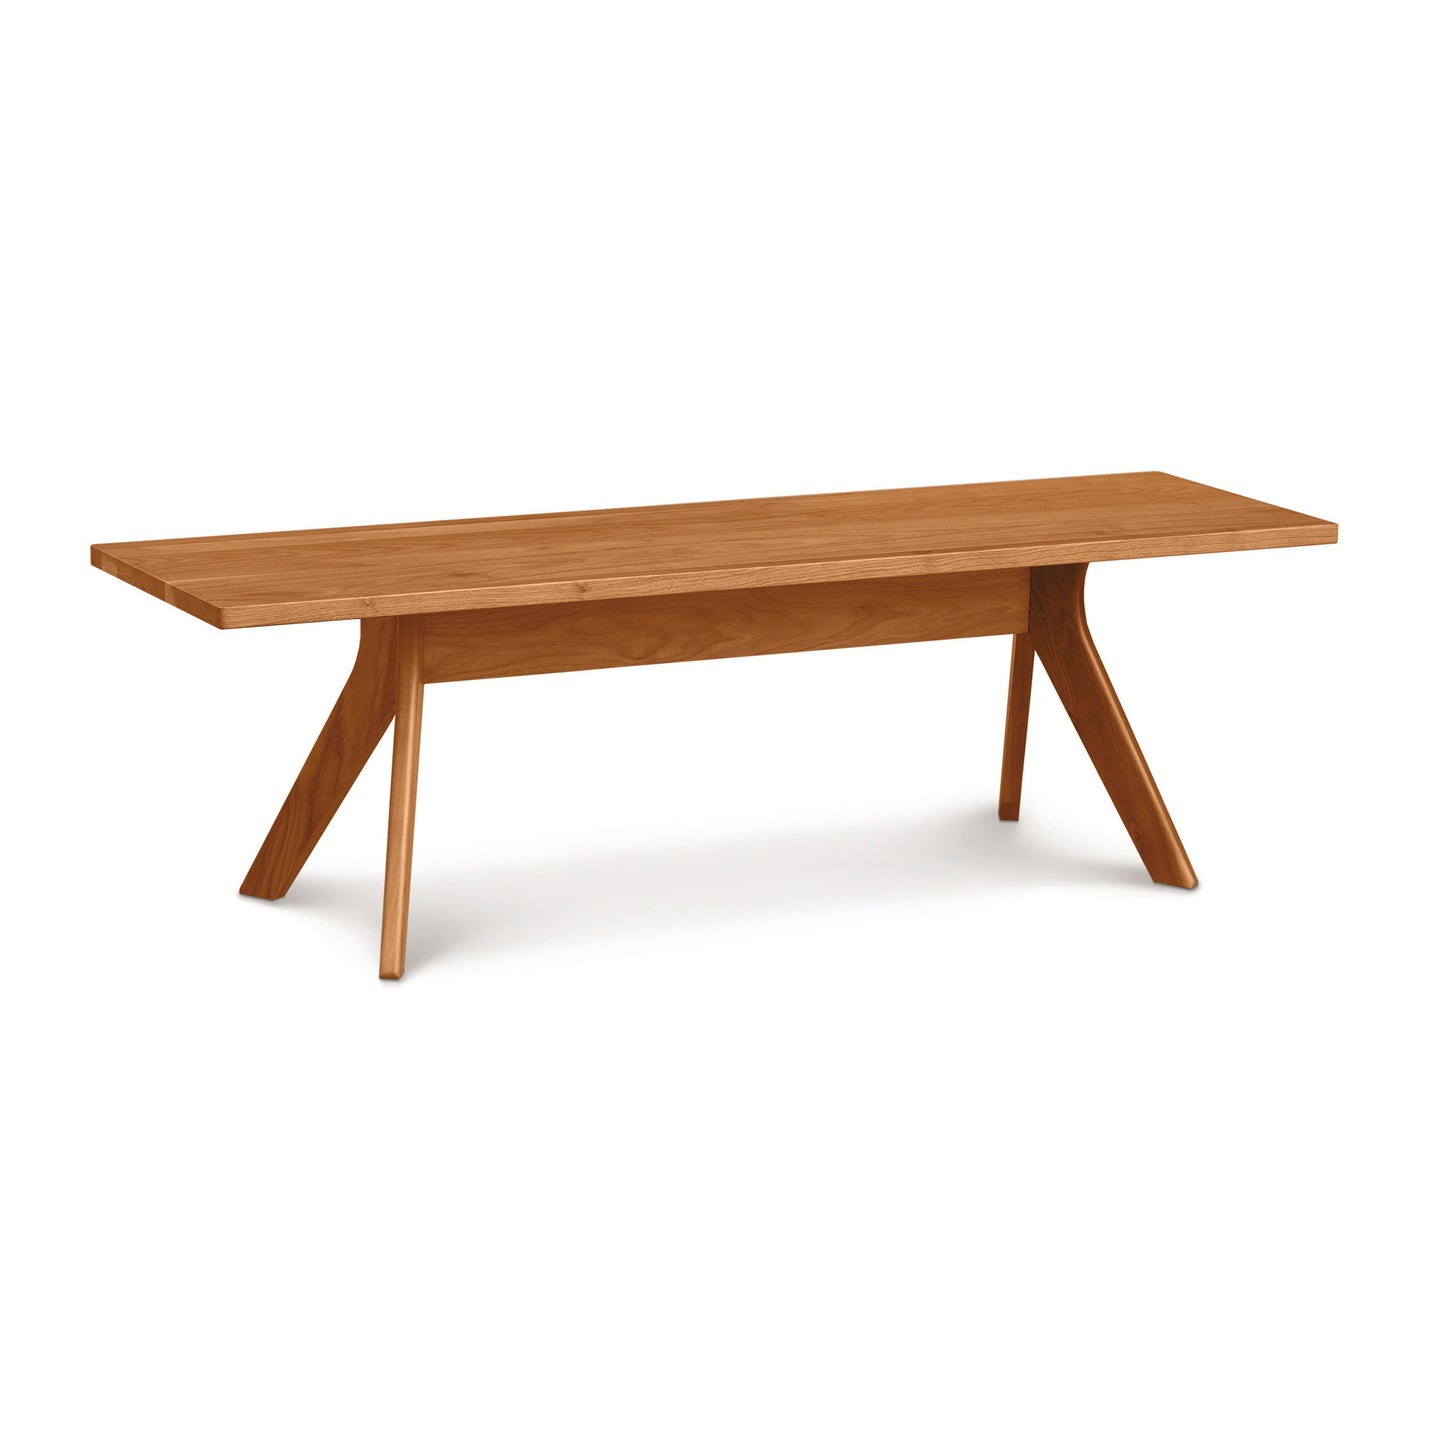 A handmade solid cherry wood Audrey Dining Bench with angled legs on a white background from Copeland Furniture.